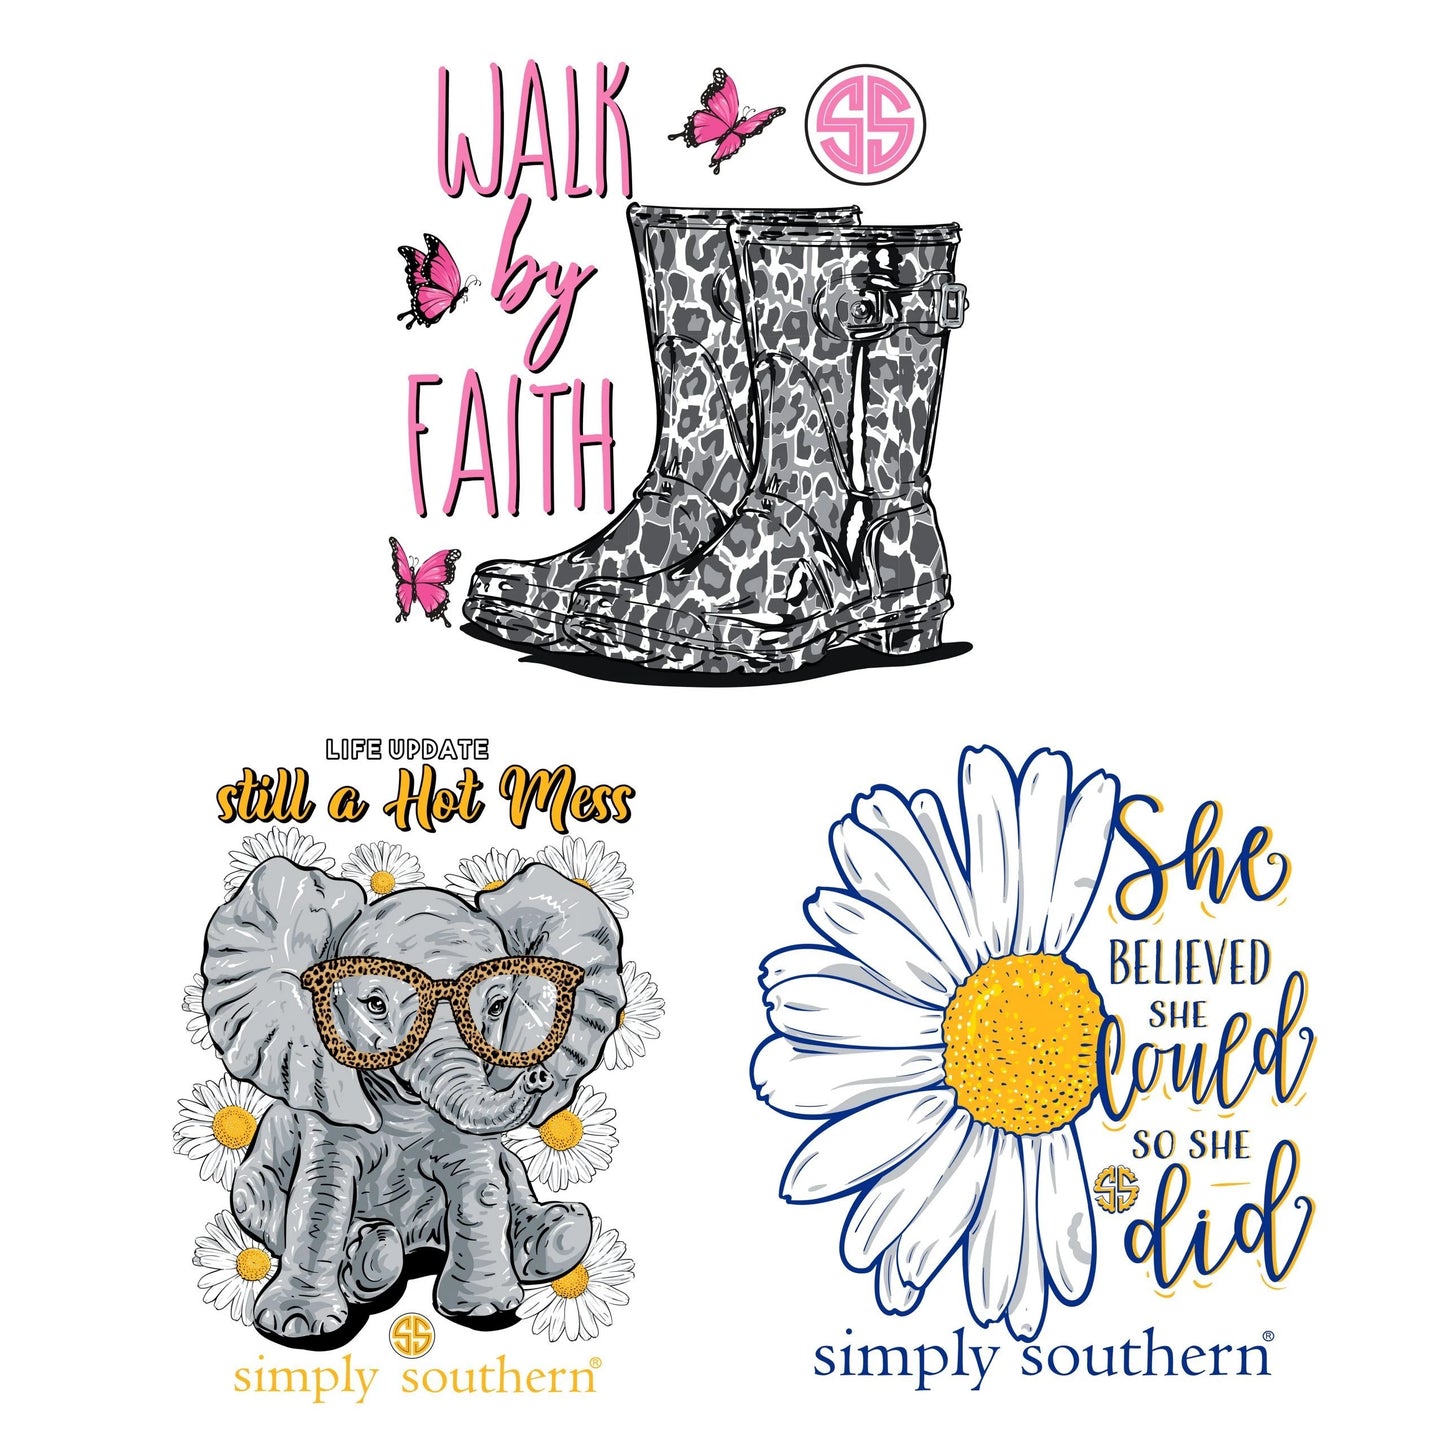 * Simply Southern 3 pack stickers